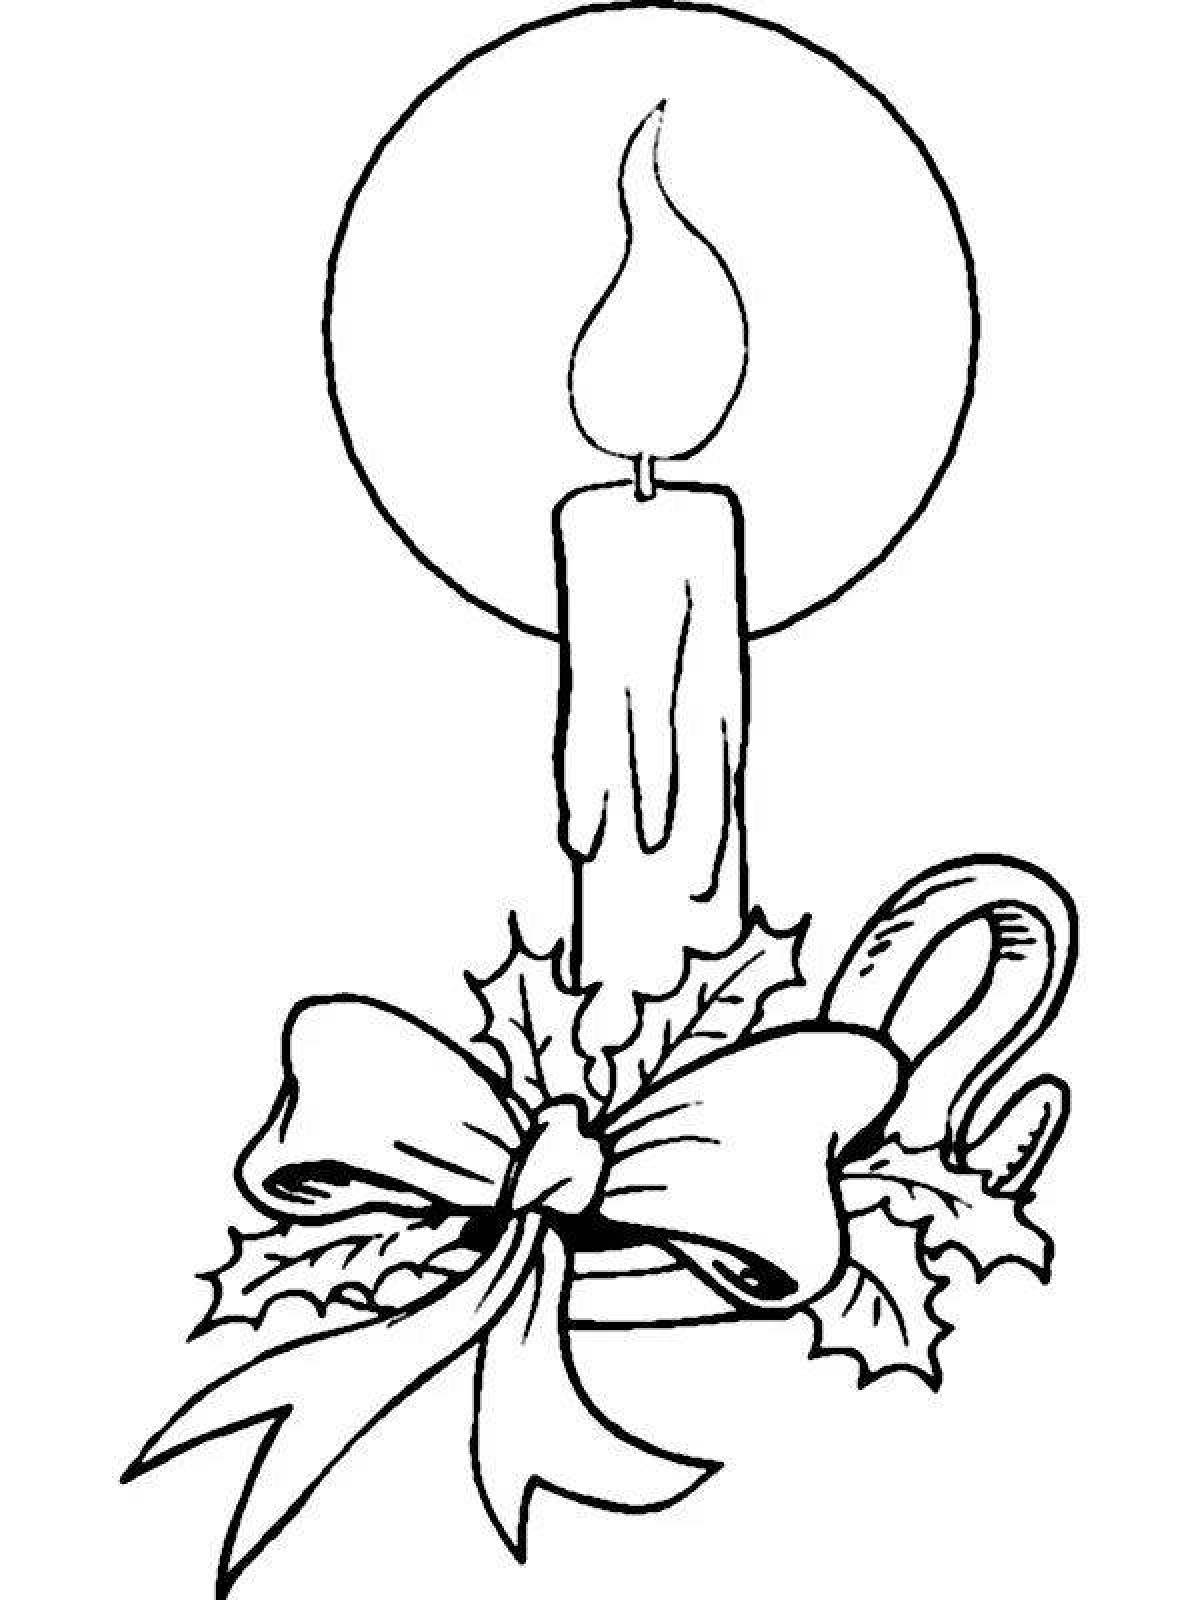 Live Christmas candle coloring